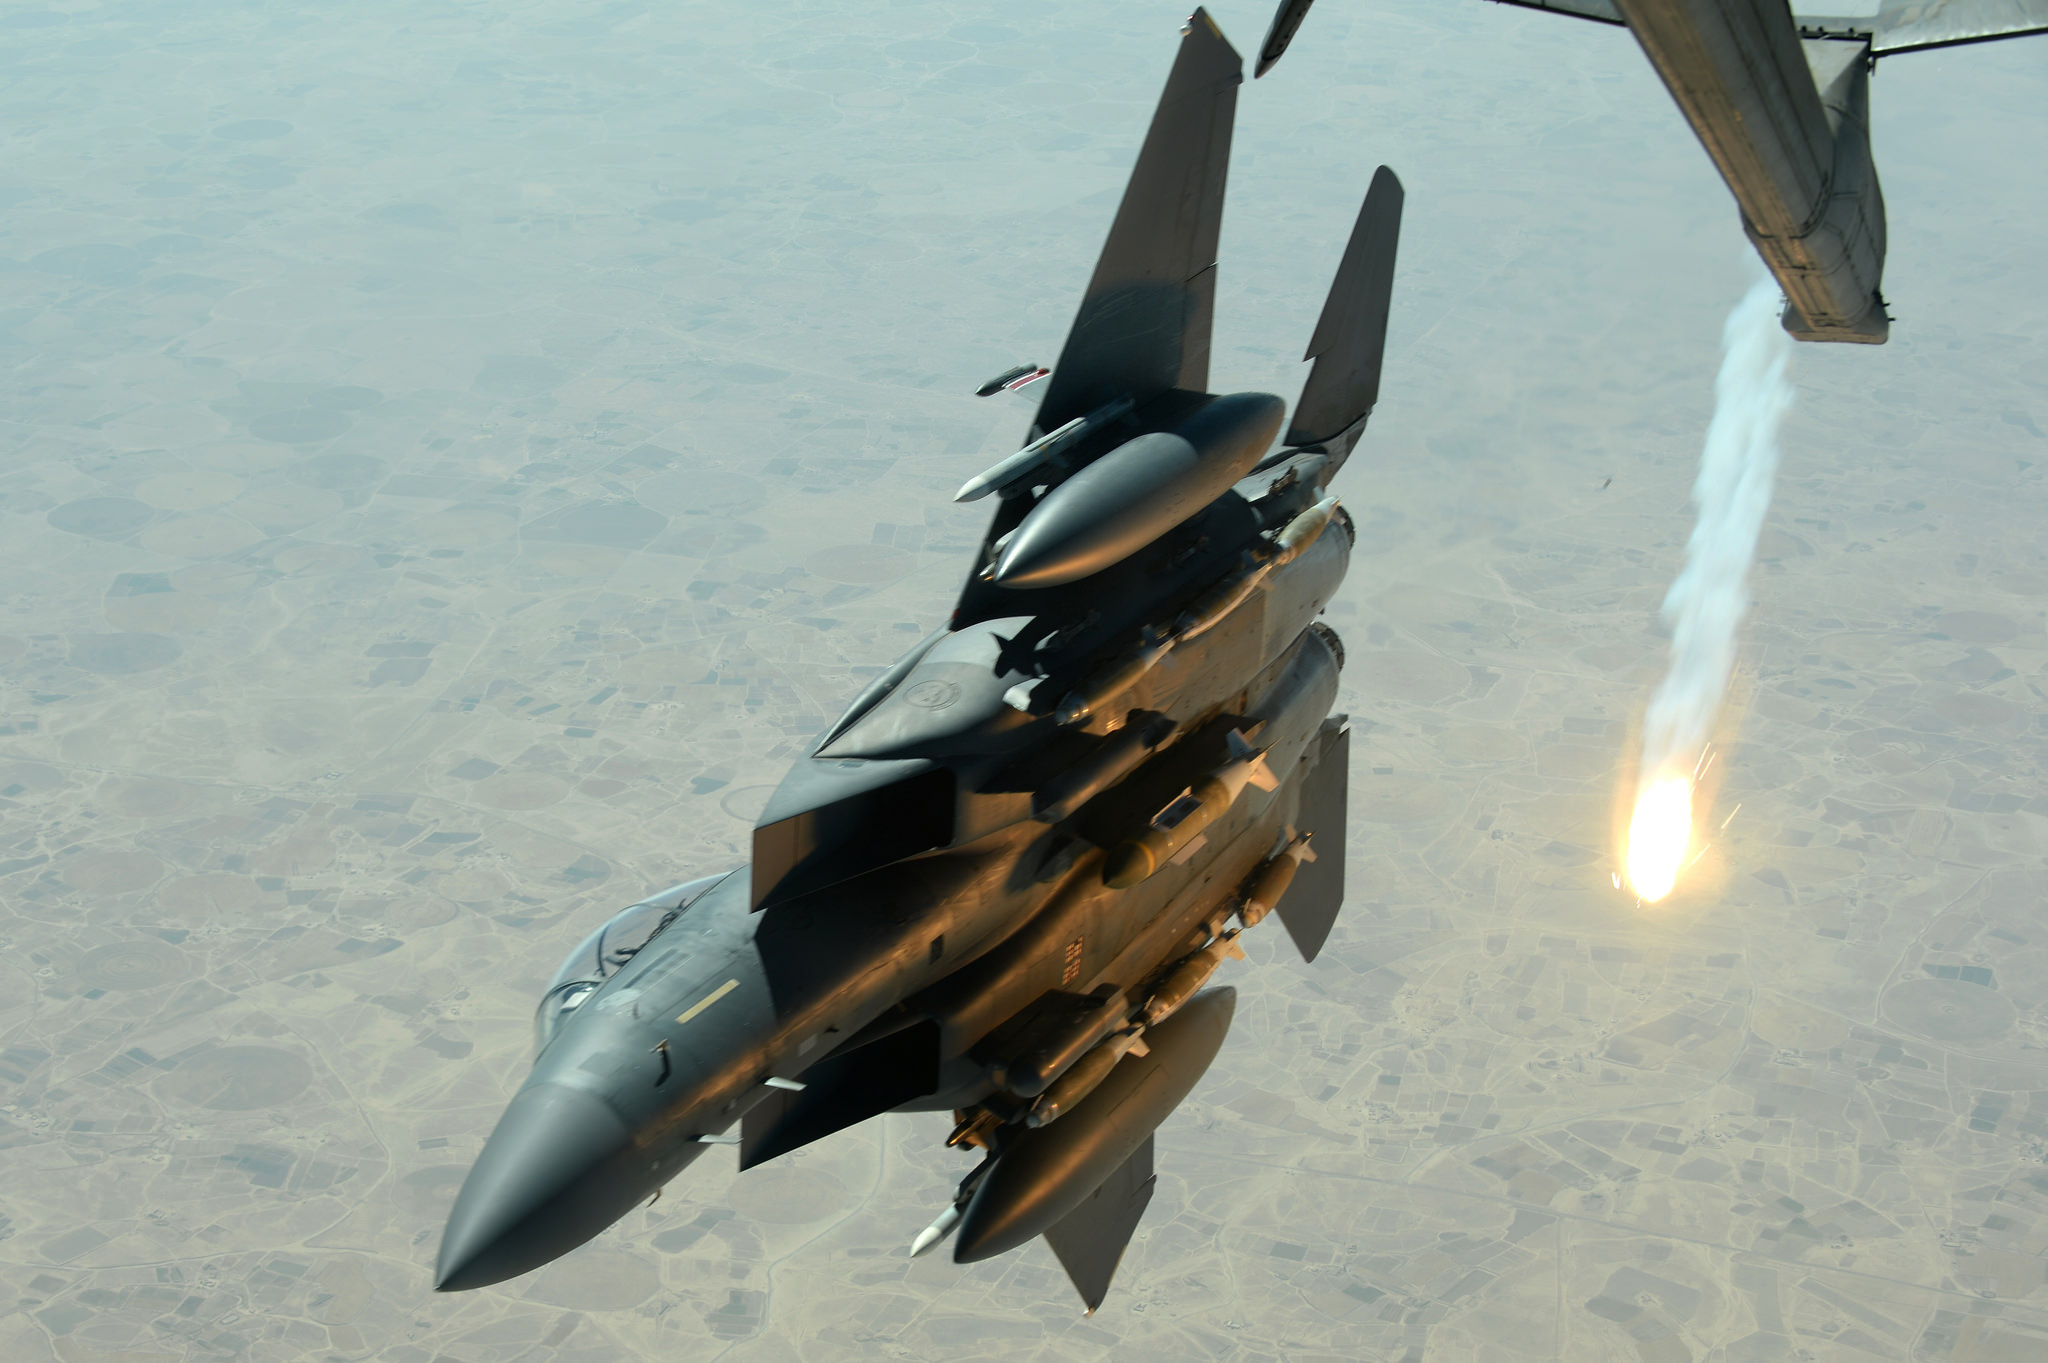 A U.S. Air Force F-15E Strike Eagle pops a flare while departing after refueling with a USAF KC-10 Extender aircraft over Southwest Asia in support of Operation Inherent Resolve, Aug. 30, 2015. U.S. Air Force photo by Staff Sgt. Sandra Welch